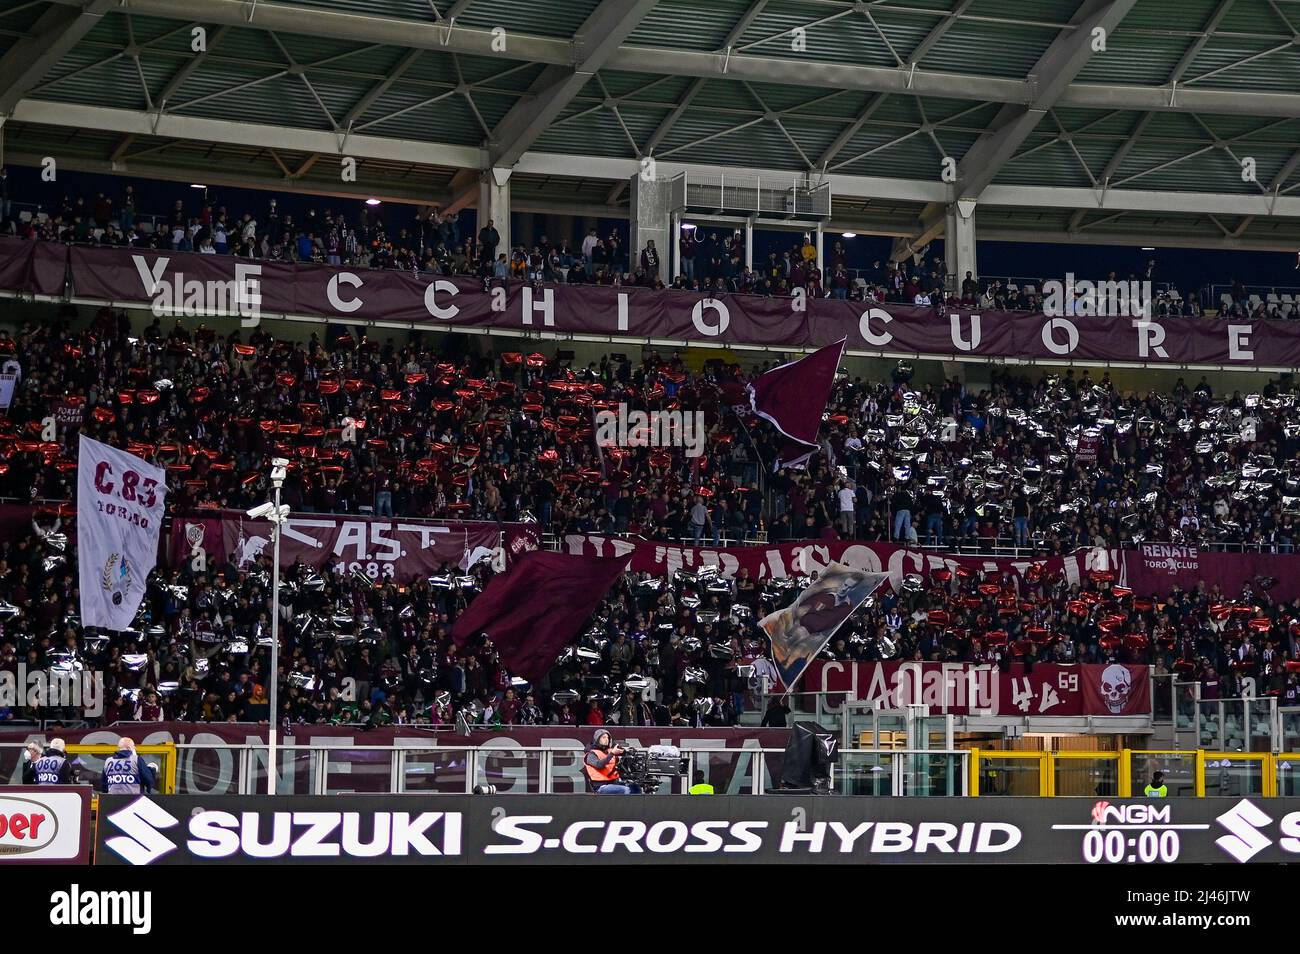 Turin, Italy. 10 April 2022. Fans of Torino FC in sector 'Curva Maratona'  show their support prior to the Serie A football match between Torino FC  and AC Milan. The match ended